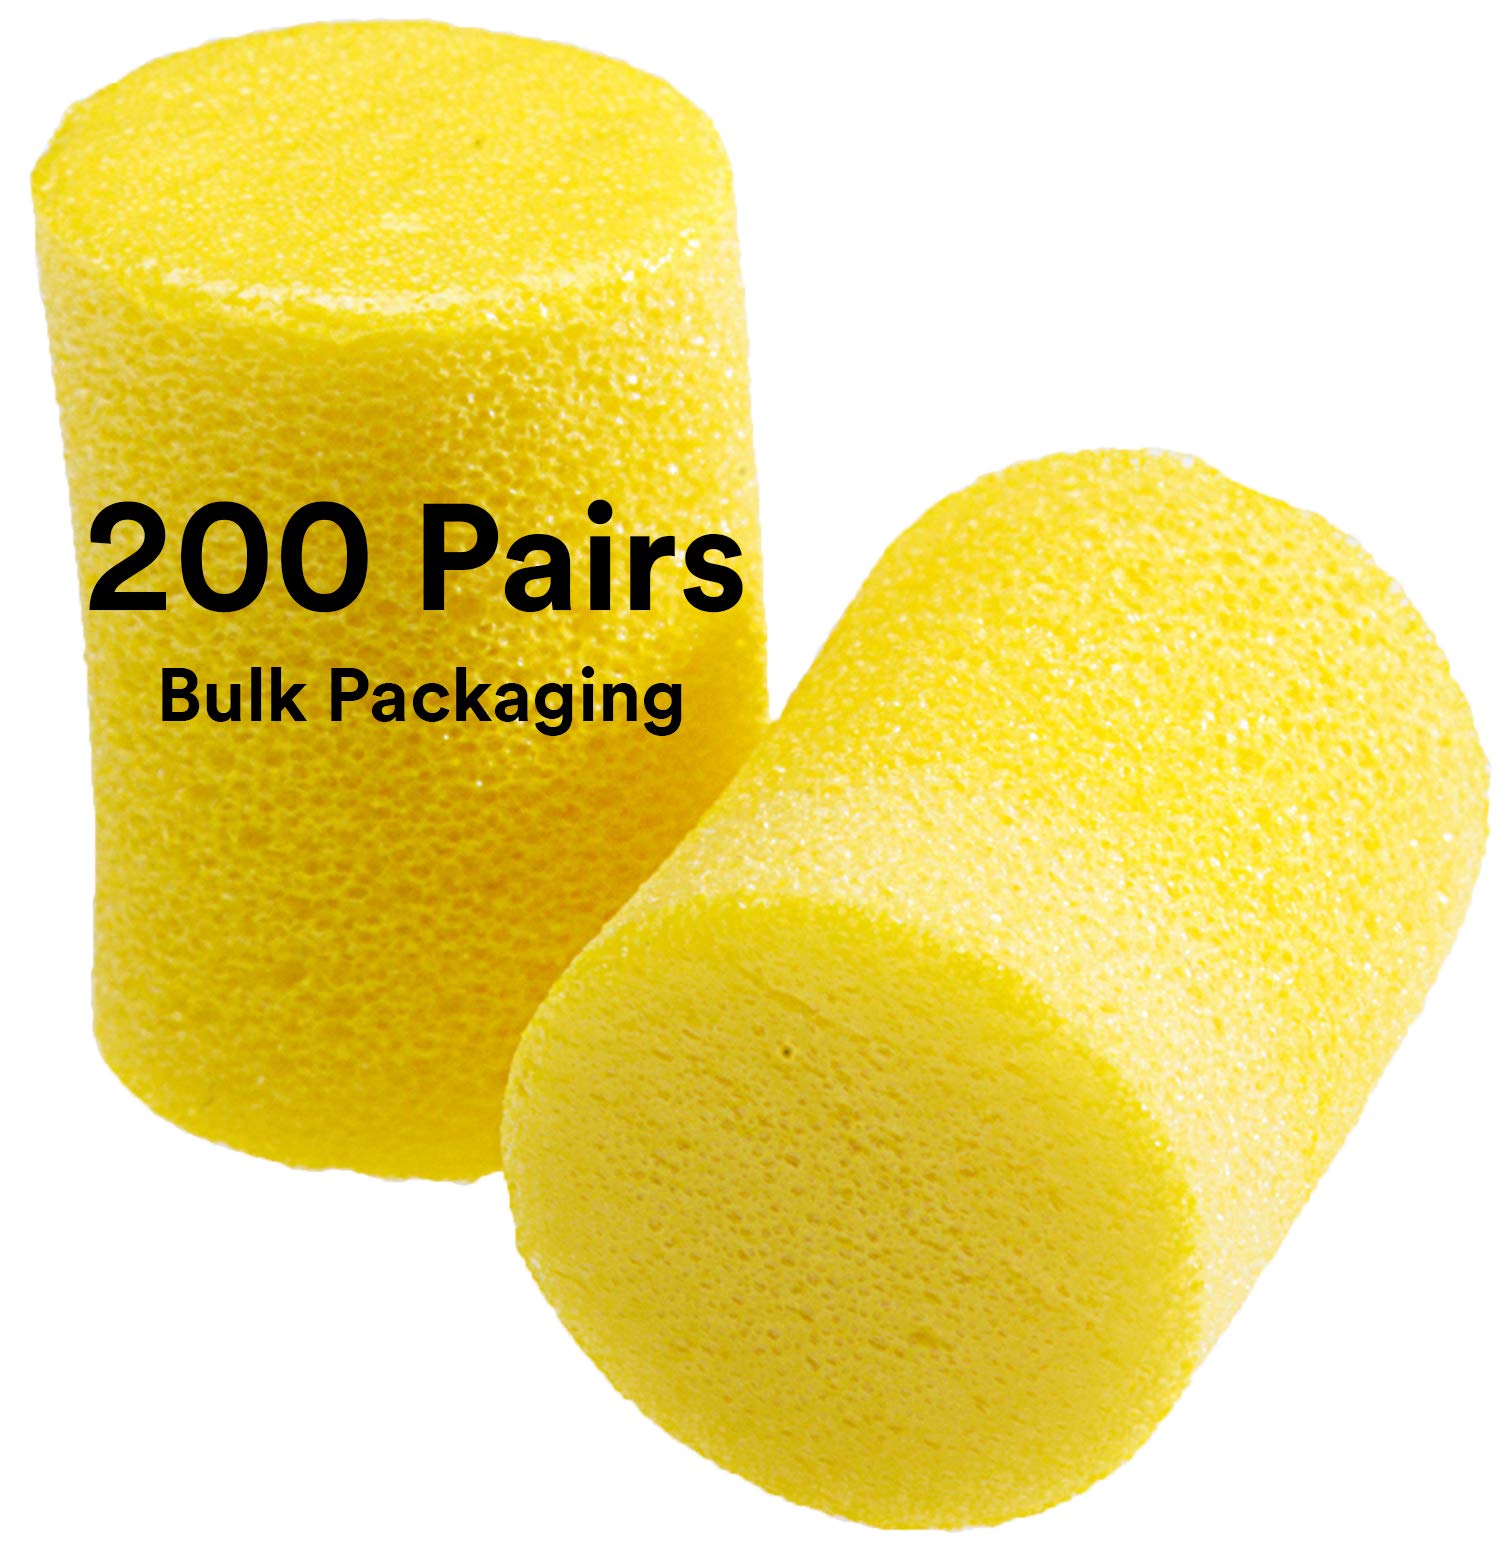 3M Ear Plugs, 200 Pairs/Box, E-A-R Classic 390-1000, Uncorded, Disposable, Foam, NRR 29, For Drilling, Grinding, Machining, Sawing, Sanding, Welding, Bulk, Bright Yellow